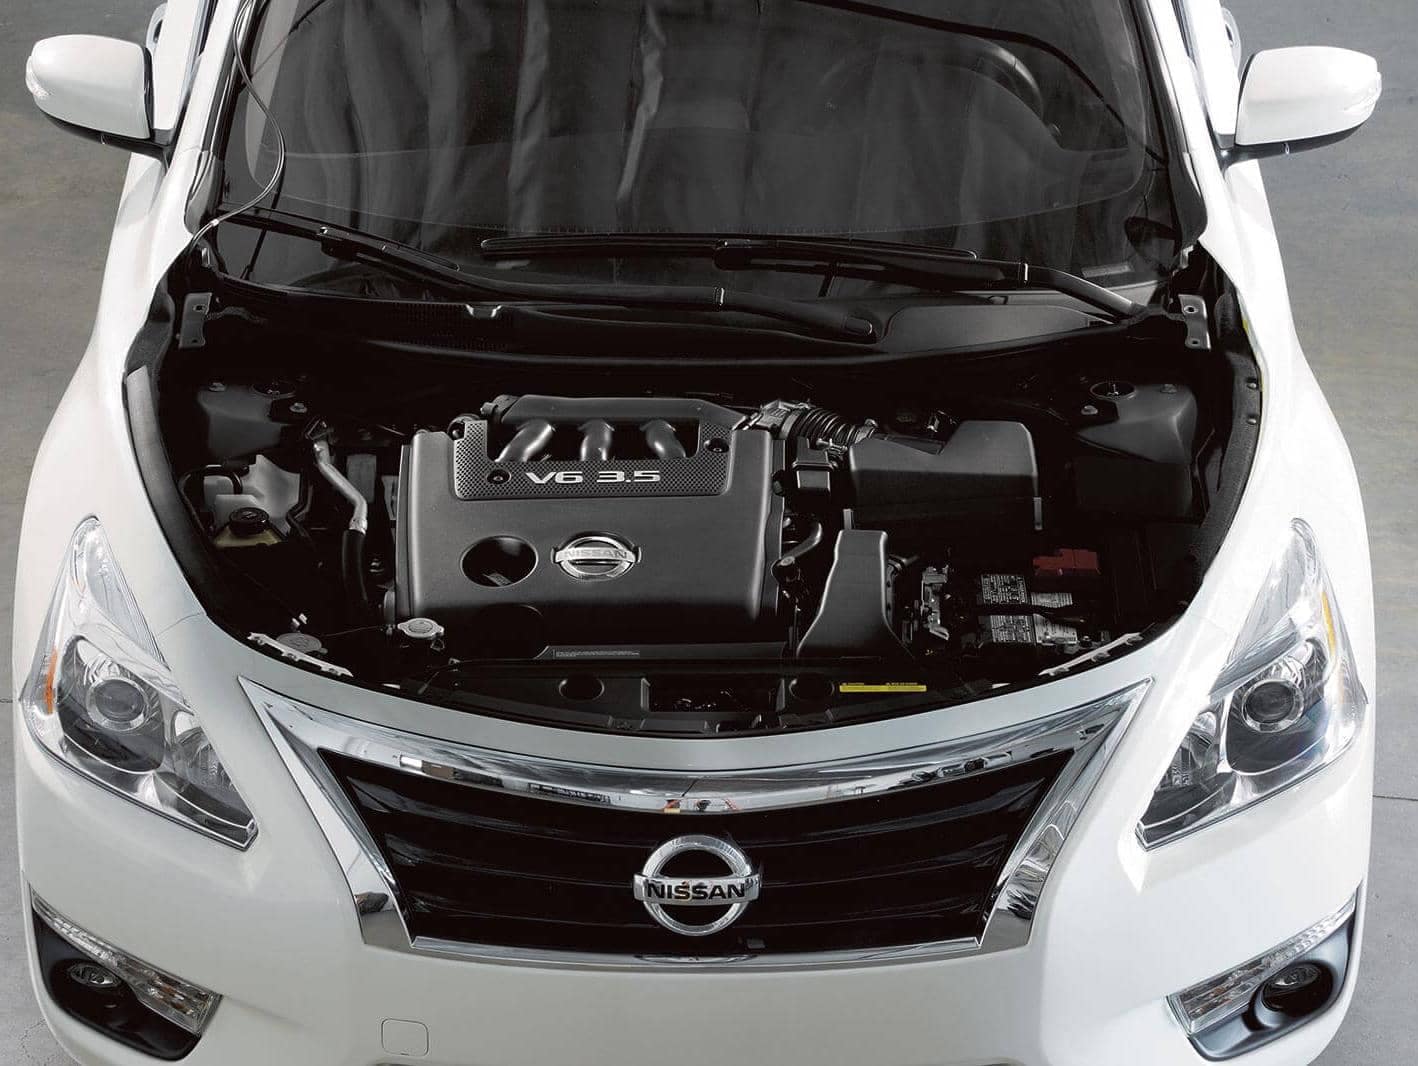 Nissan Vehicle with engine exposed.